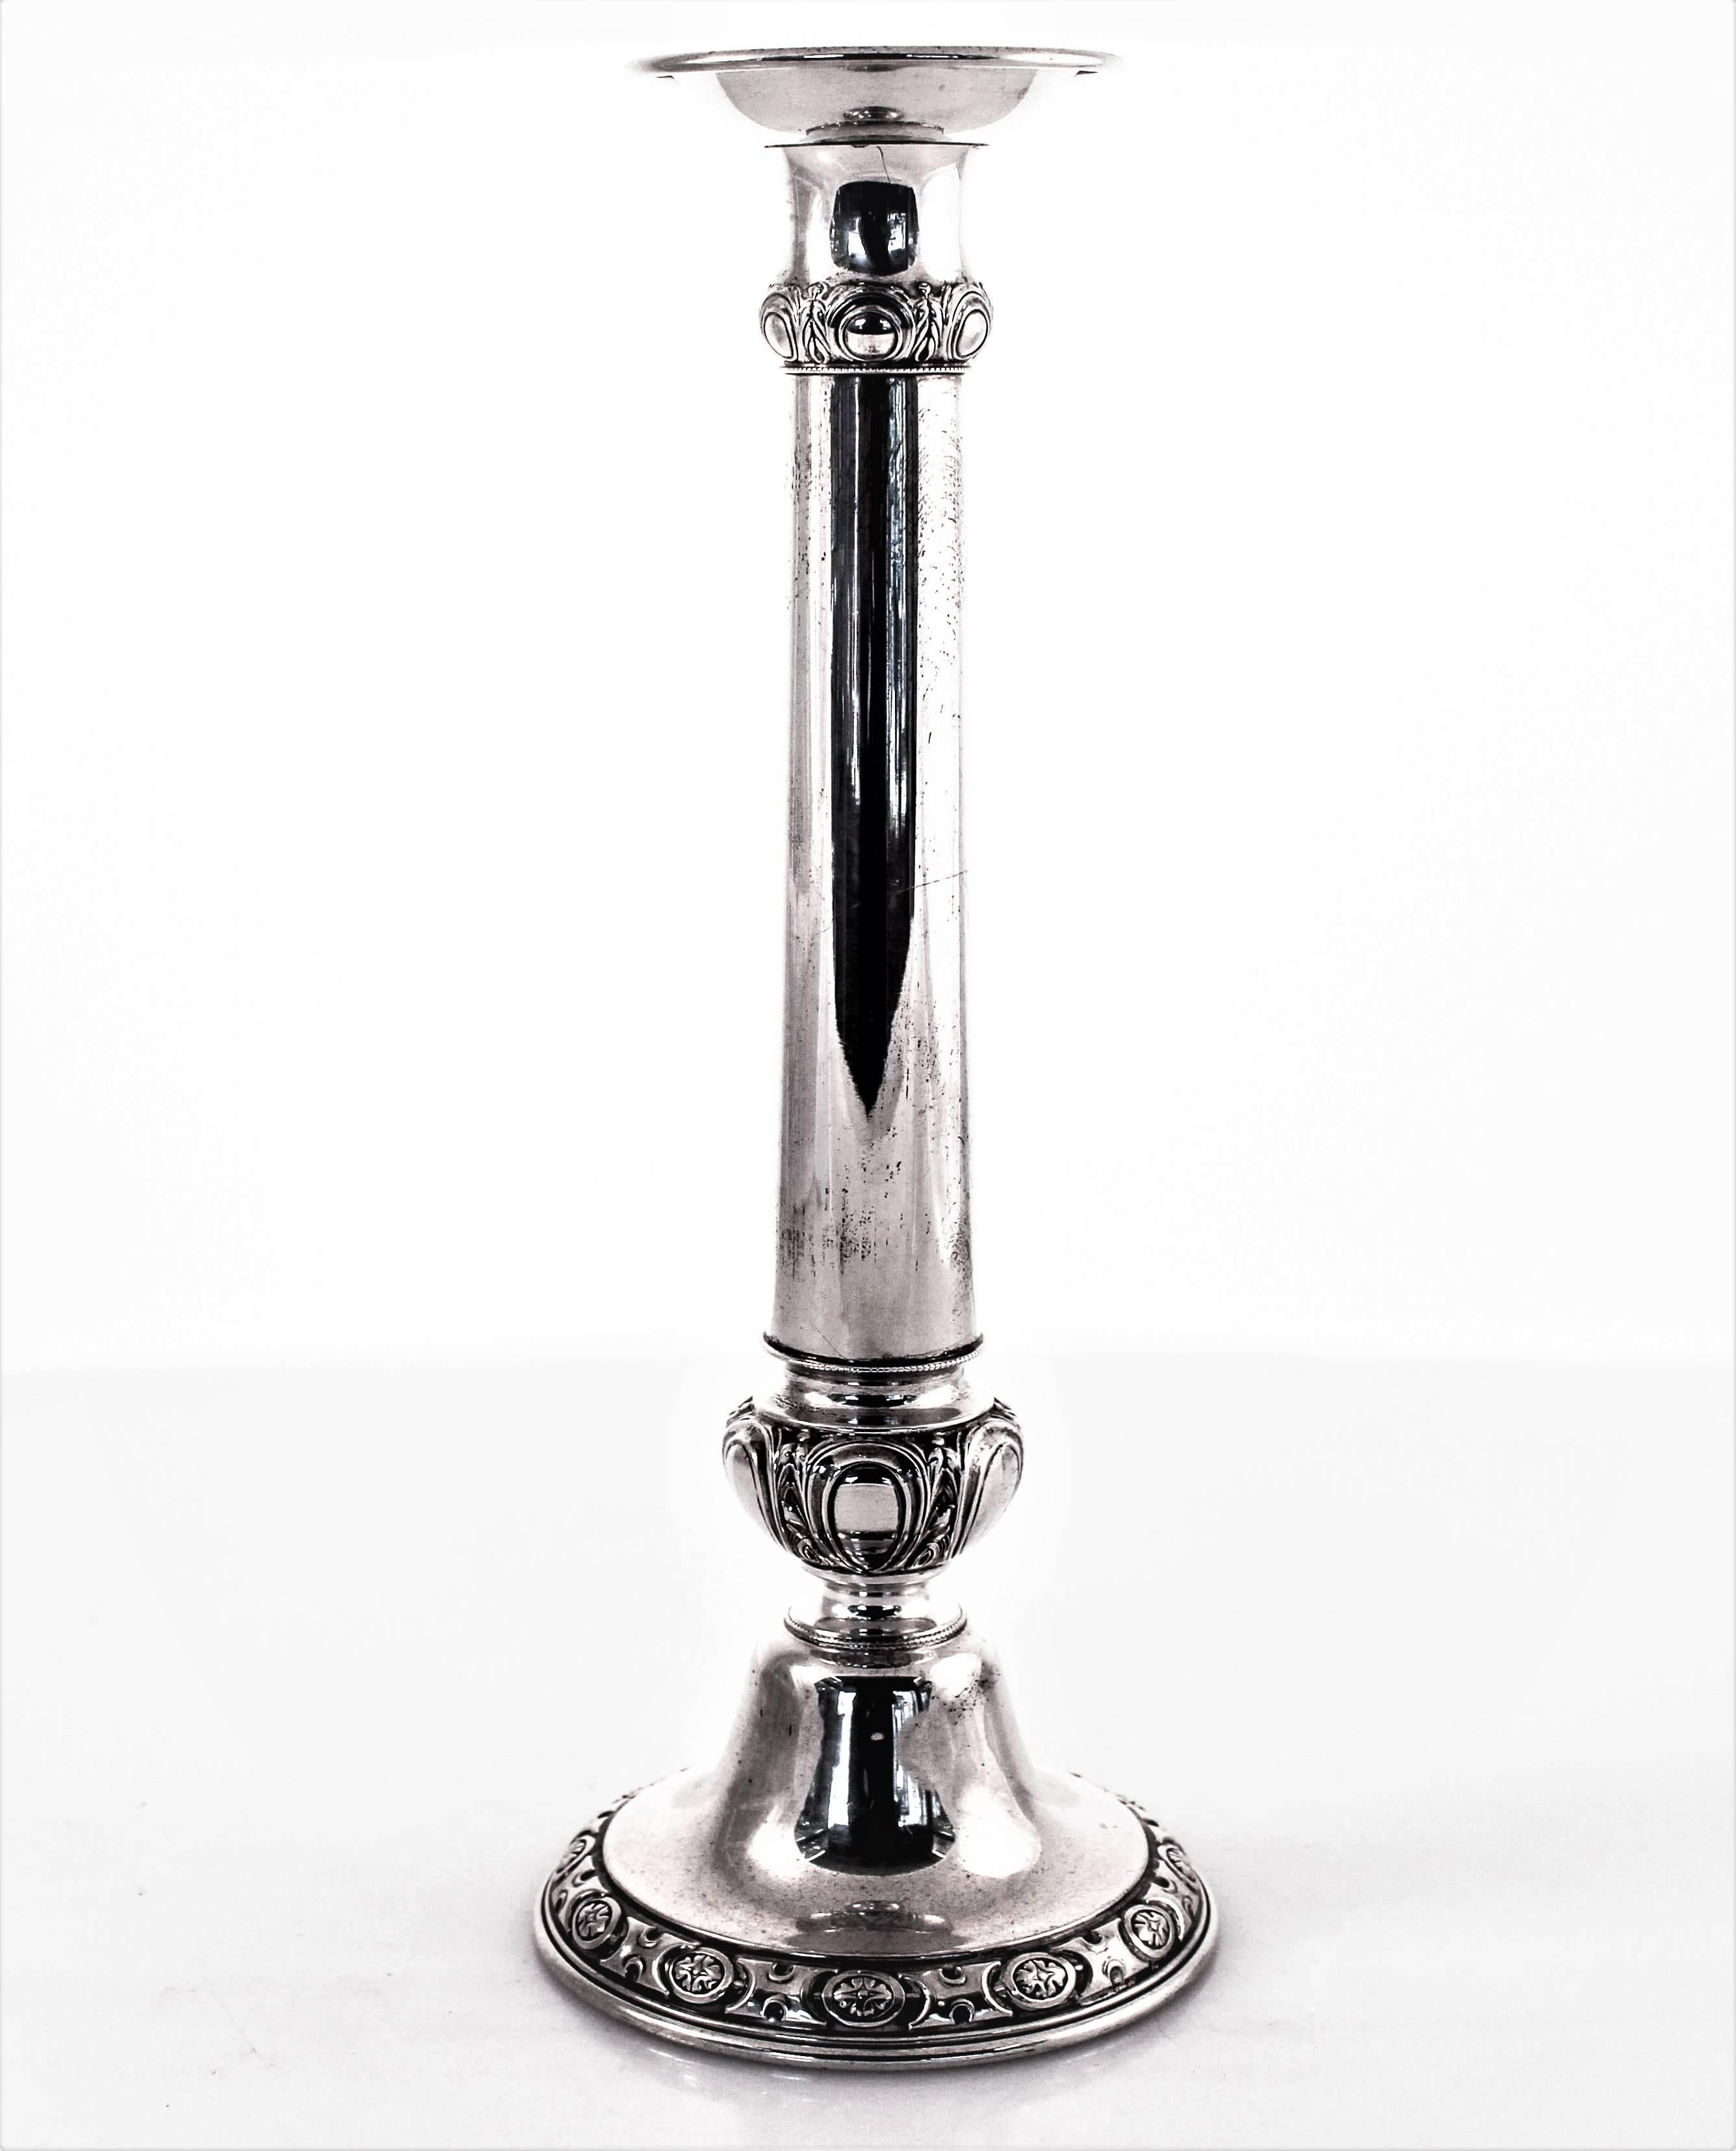 These Art Deco candlesticks have a columnar shape with a decorative motif around the bottom, waist and neck. Around the bottom an oval shaped pattern is interspersed between an H-like design. Around the waist and neck a similar design; complimenting